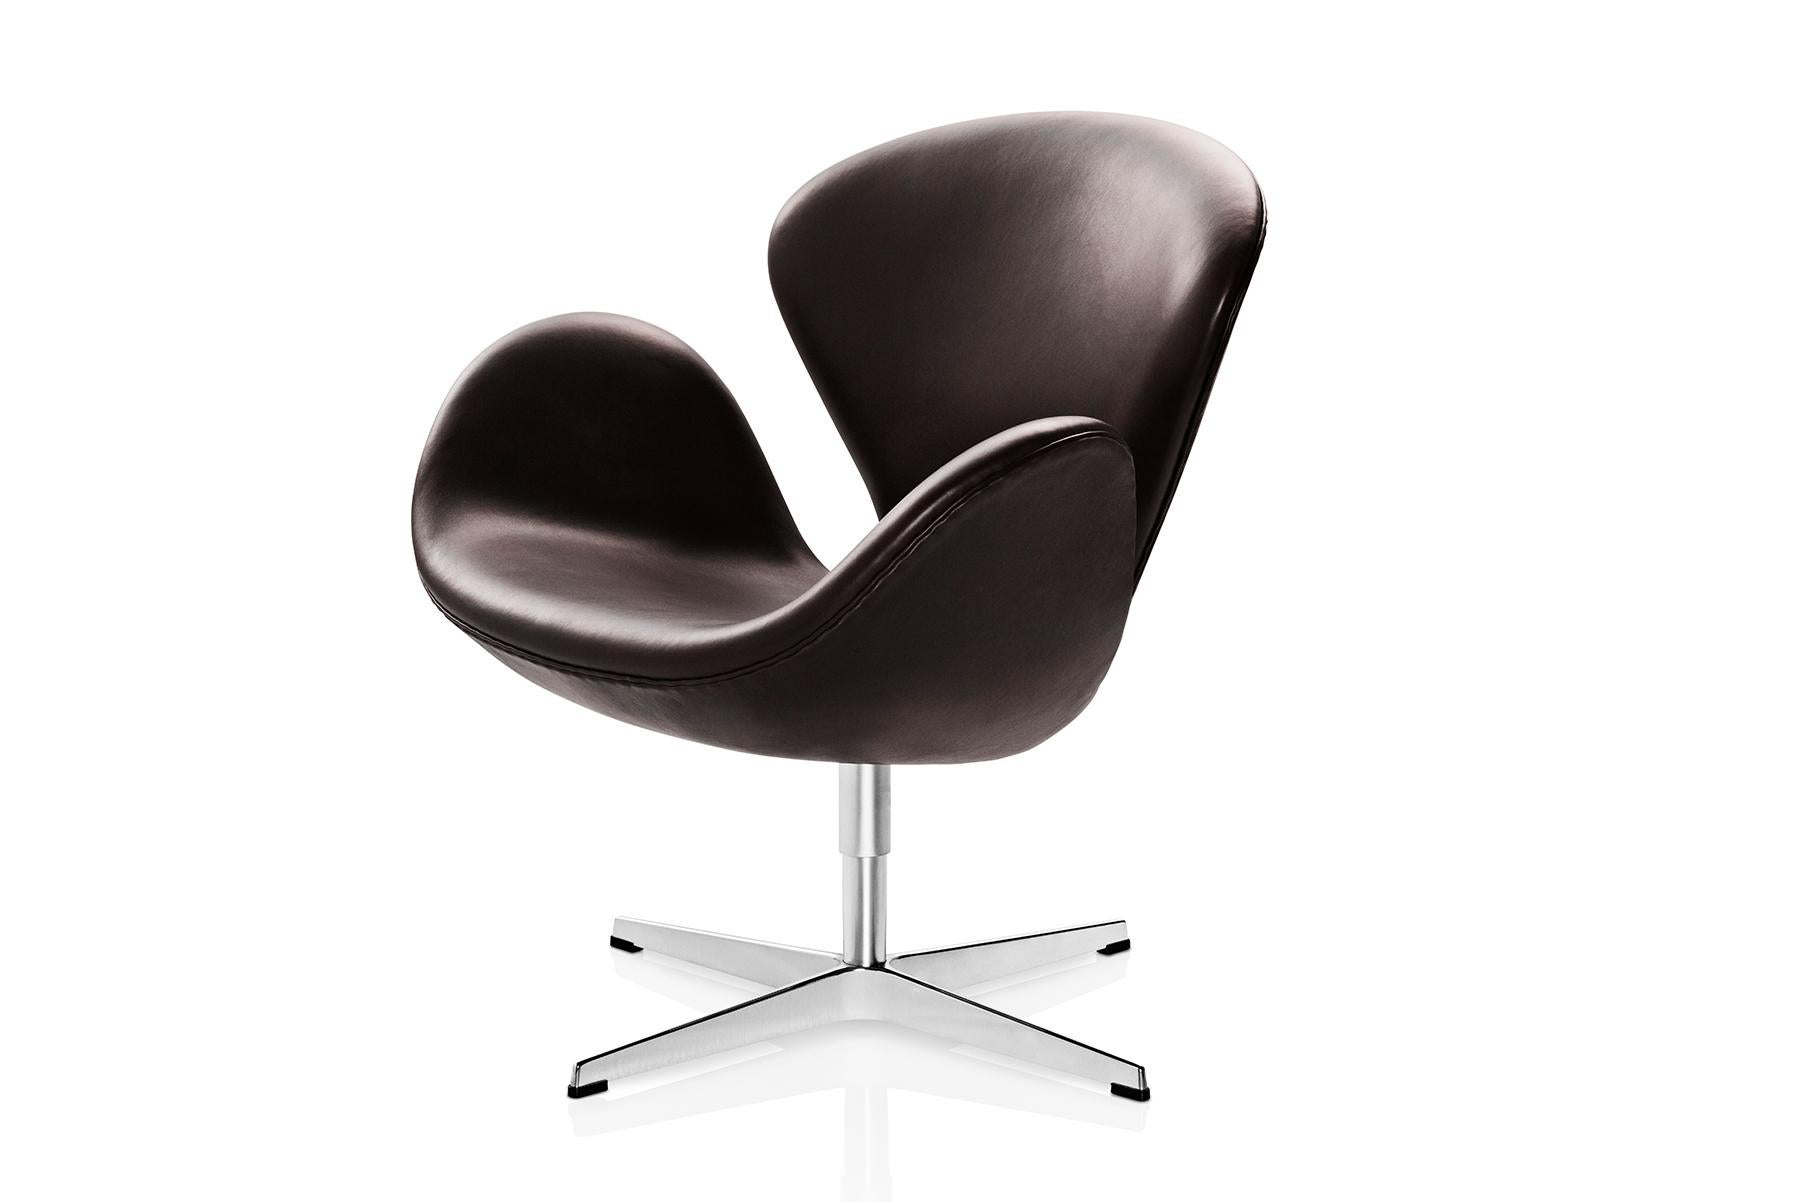 Arne Jacobsen designed the Swan as well as the Egg for the lobby and lounge areas at the SAS Royal Hotel in Copenhagen, in 1958. Back then, the Swan was a technologically innovative chair: No straight lines, only curves. Fall in love with Arne